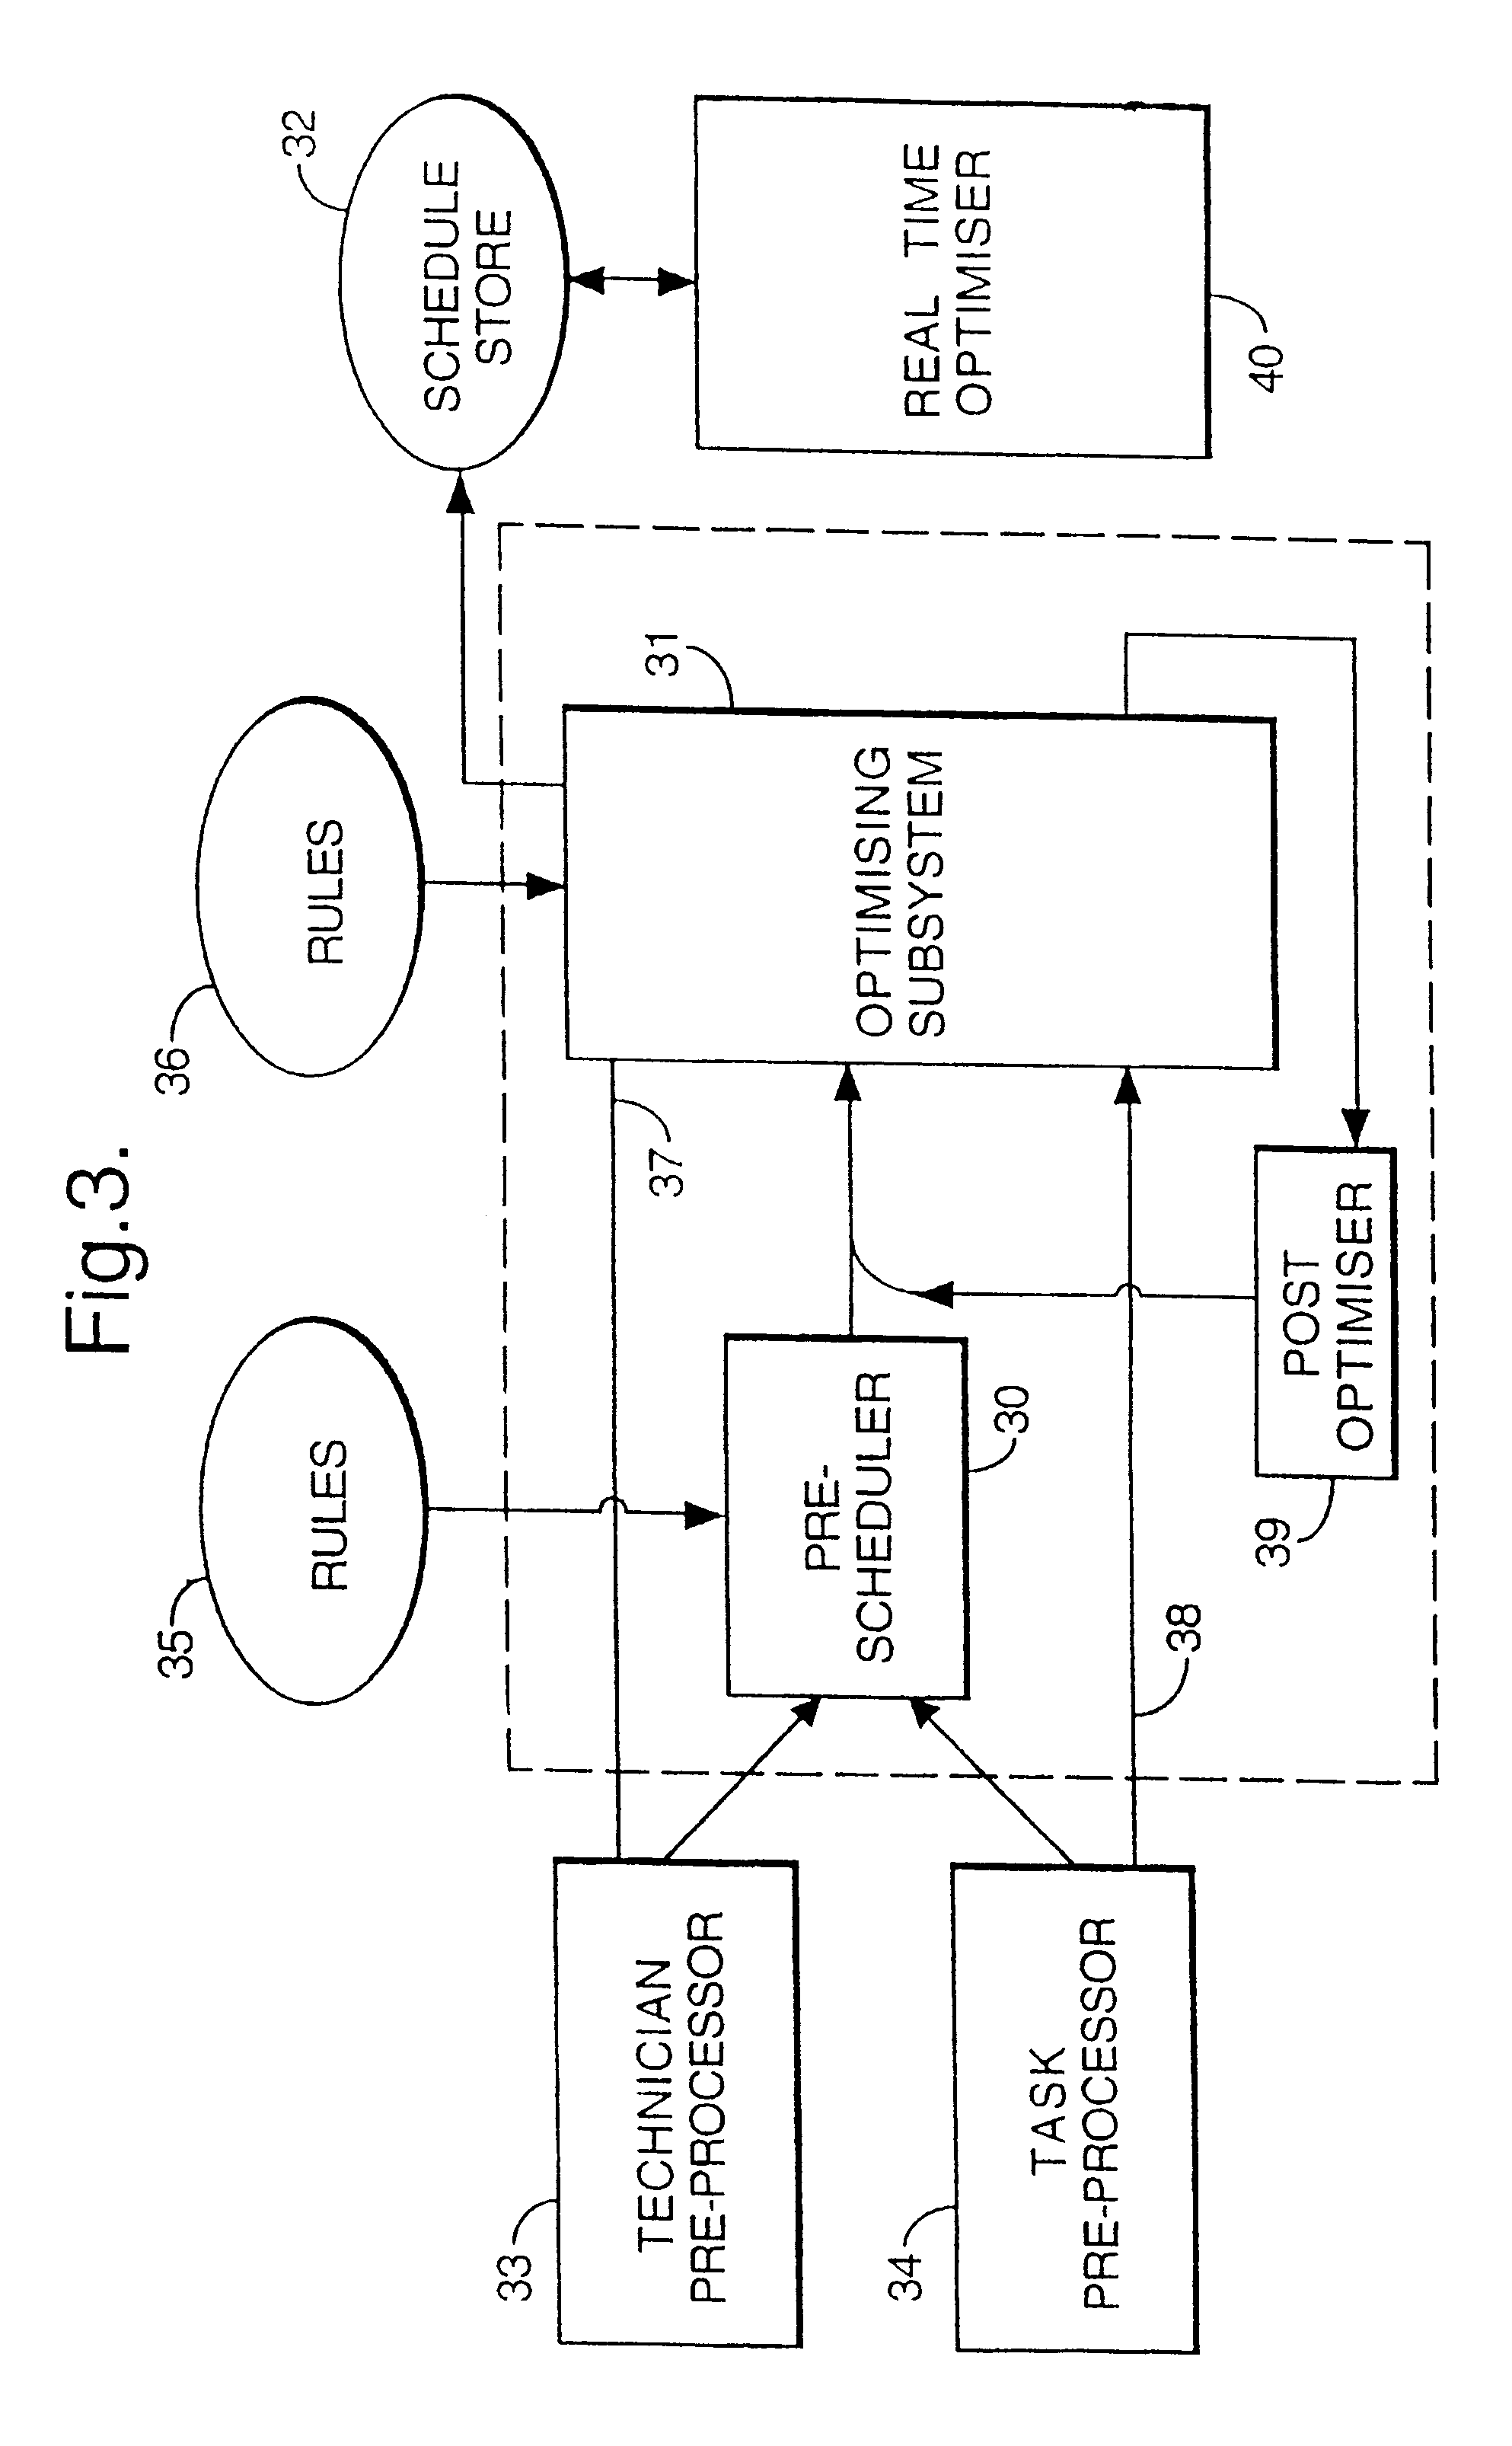 Method and apparatus for resource allocation when schedule changes are incorporated in real time